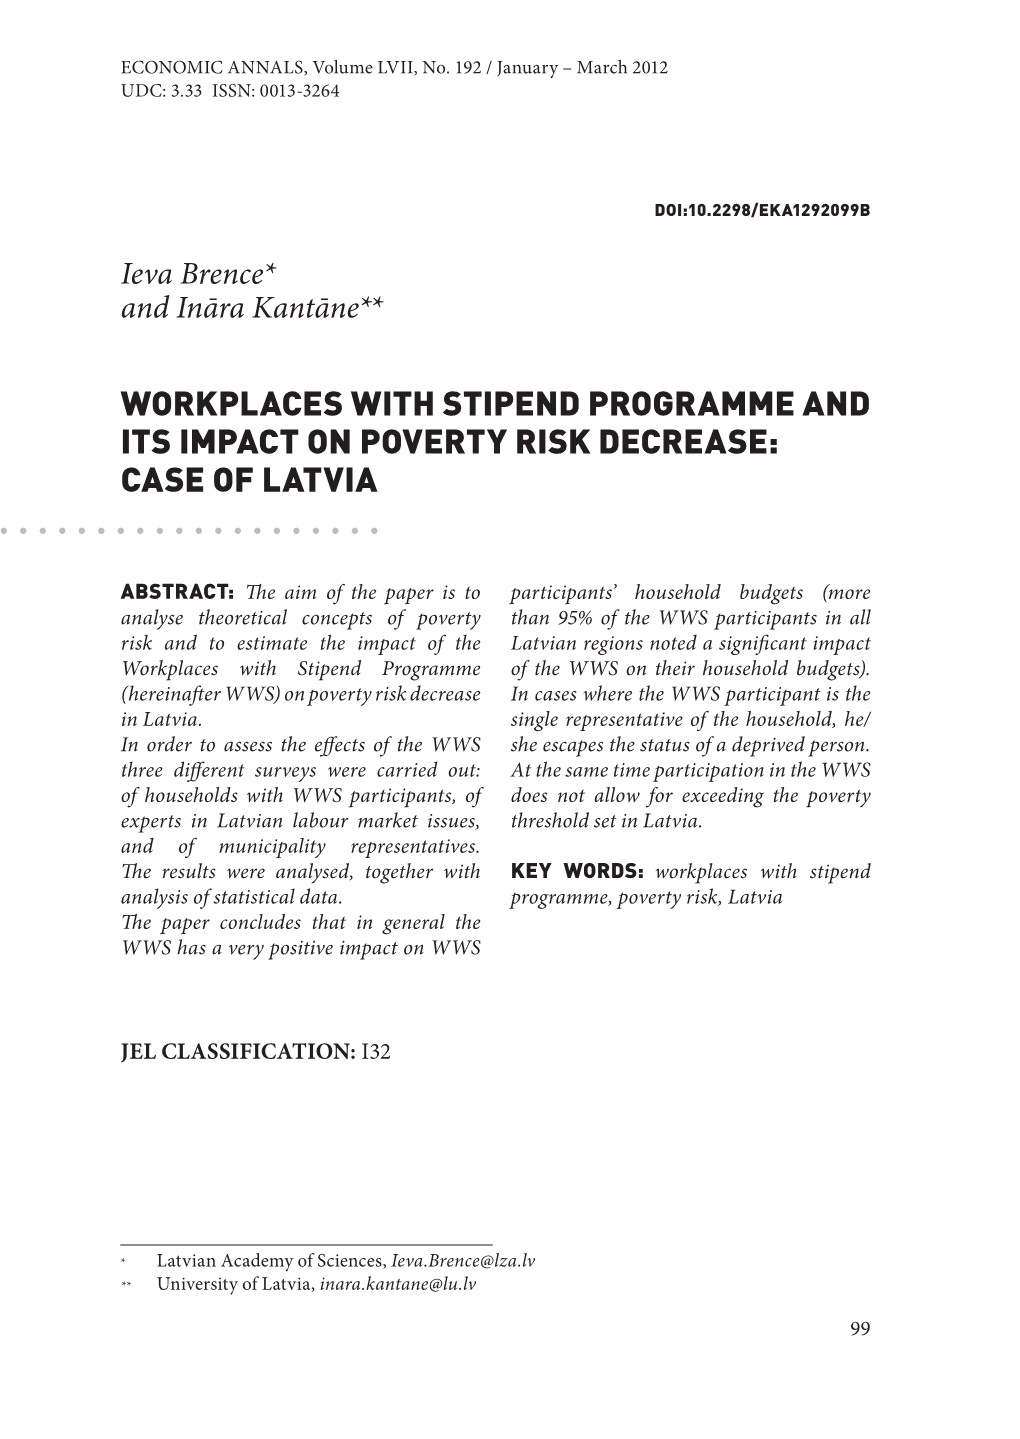 Workplaces with Stipend Programme and Its Impact on Poverty Risk Decrease: Case of Latvia